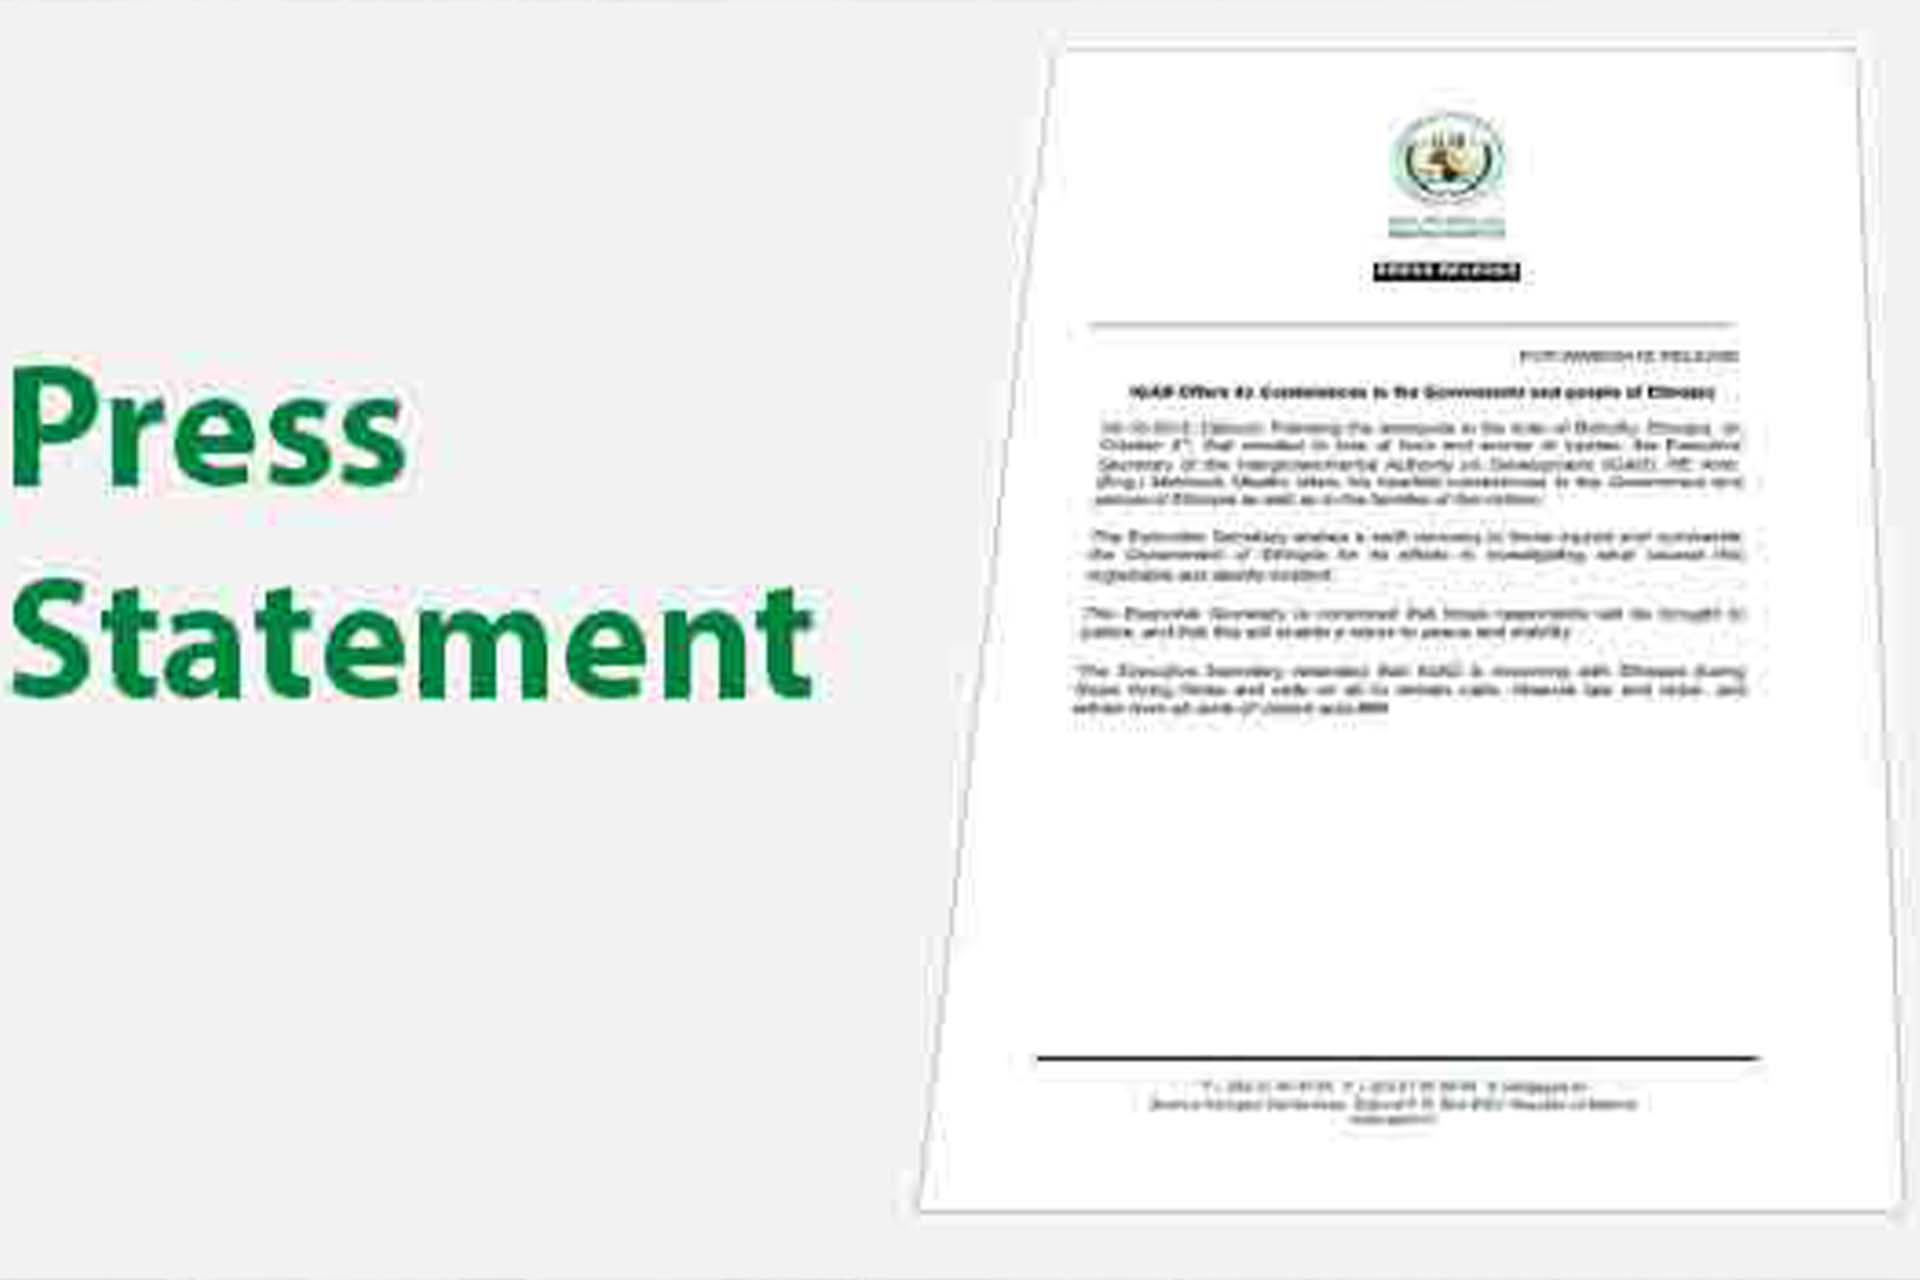 IGAD welcomes the decision by the government of Belgium to recognize diplomatic and service passports of Somalia